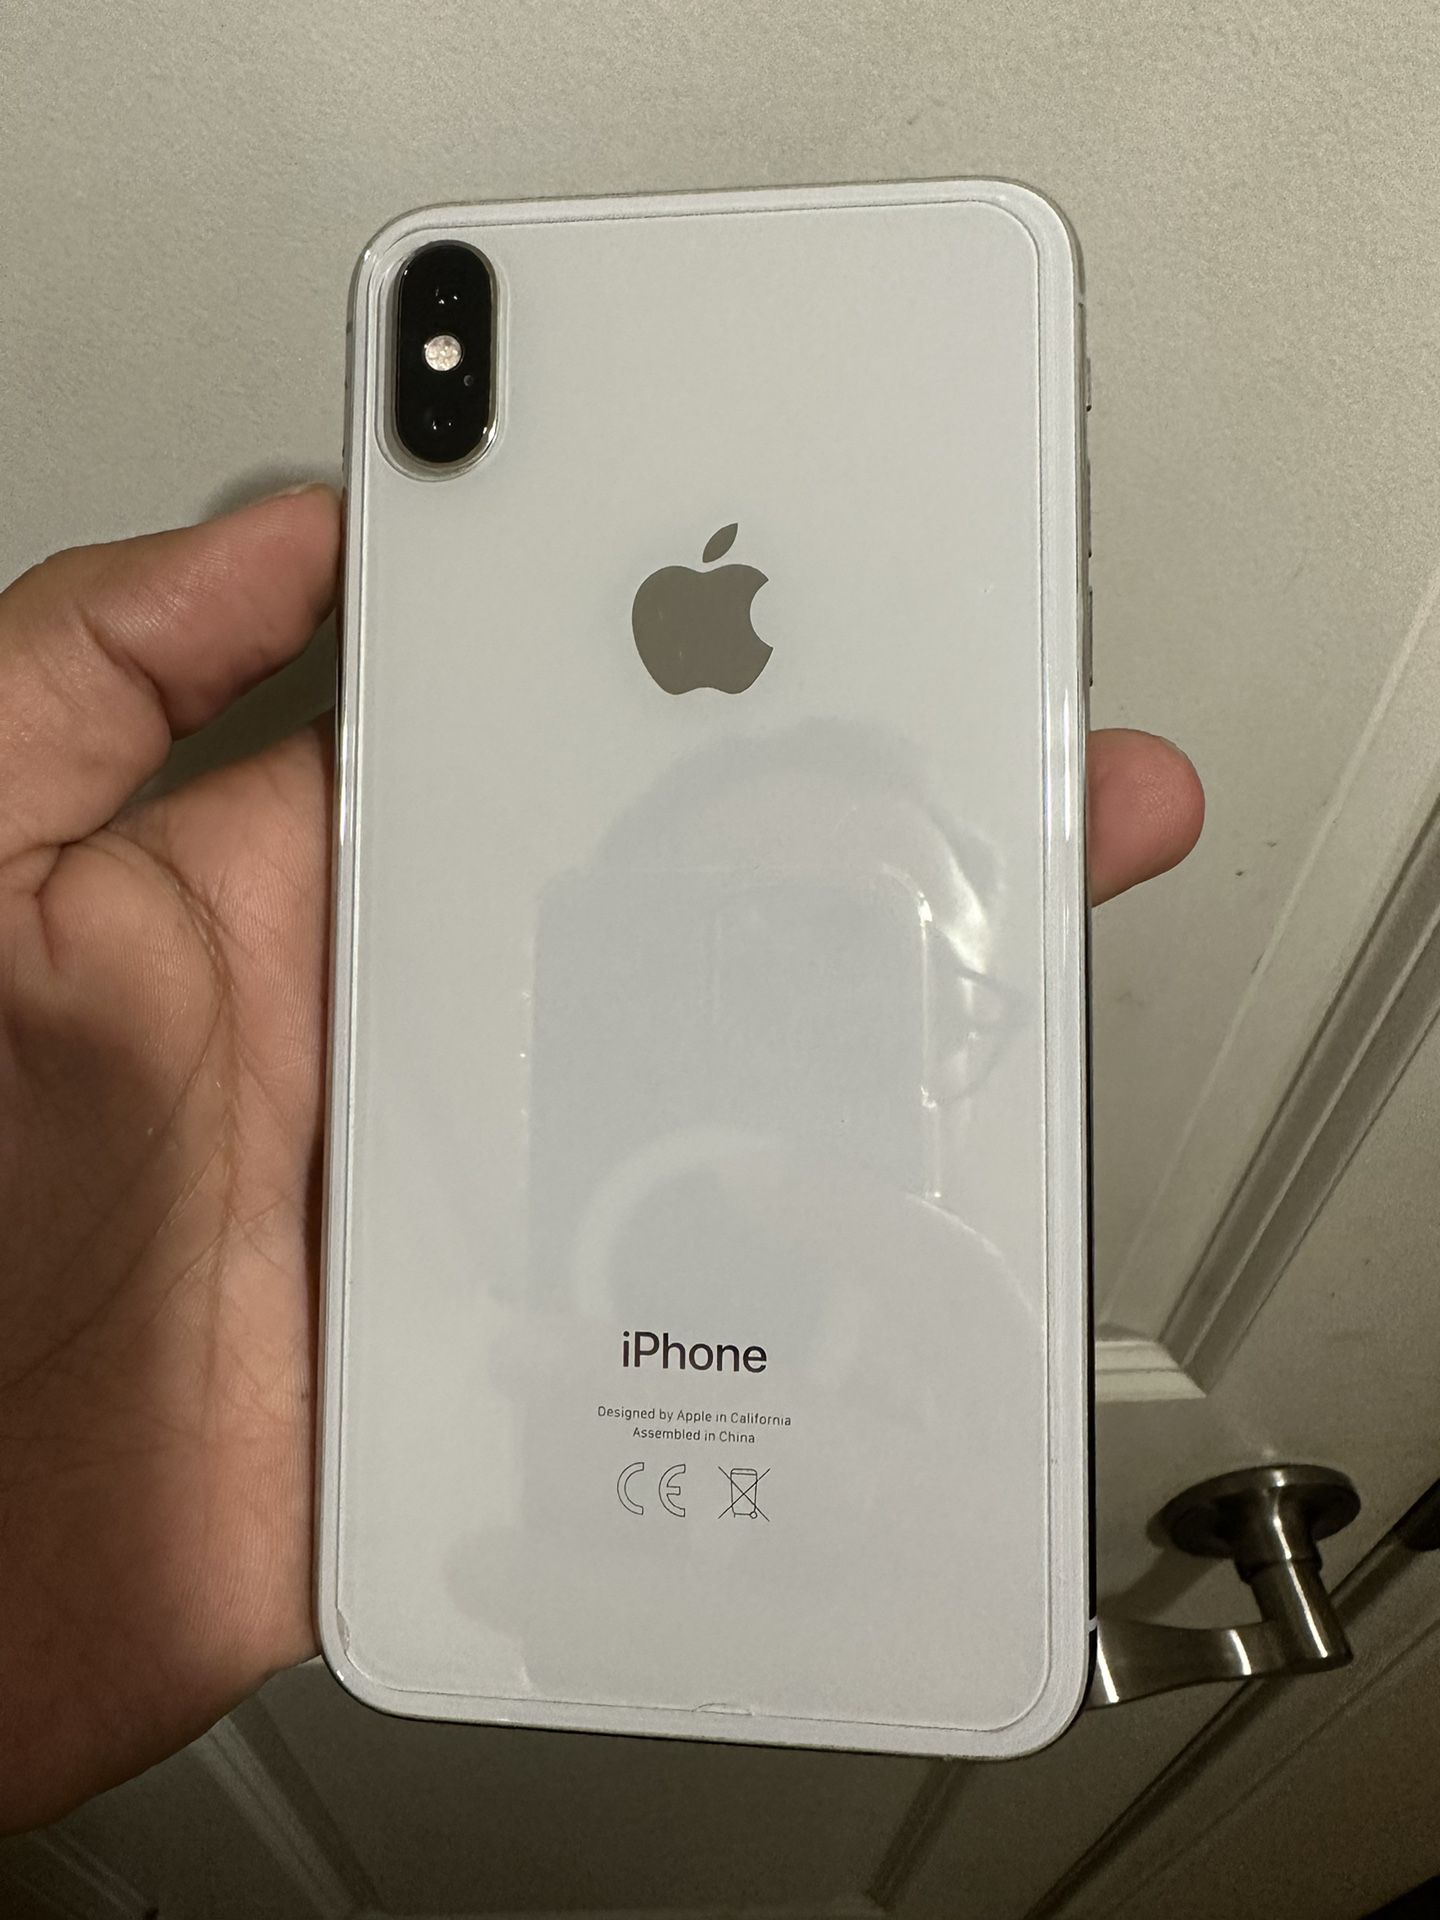 IPHONE XS MAX UNLOCKED FOR ANY CARRIER WORLDWIDE 